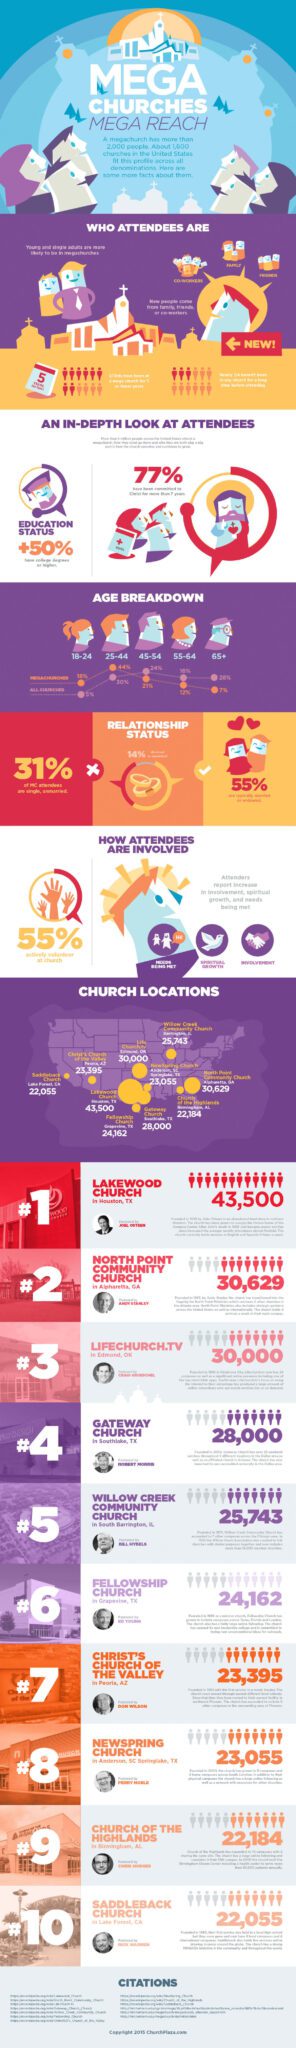 Megachurches have Mega reach. Infographic with stats about attendees and locations